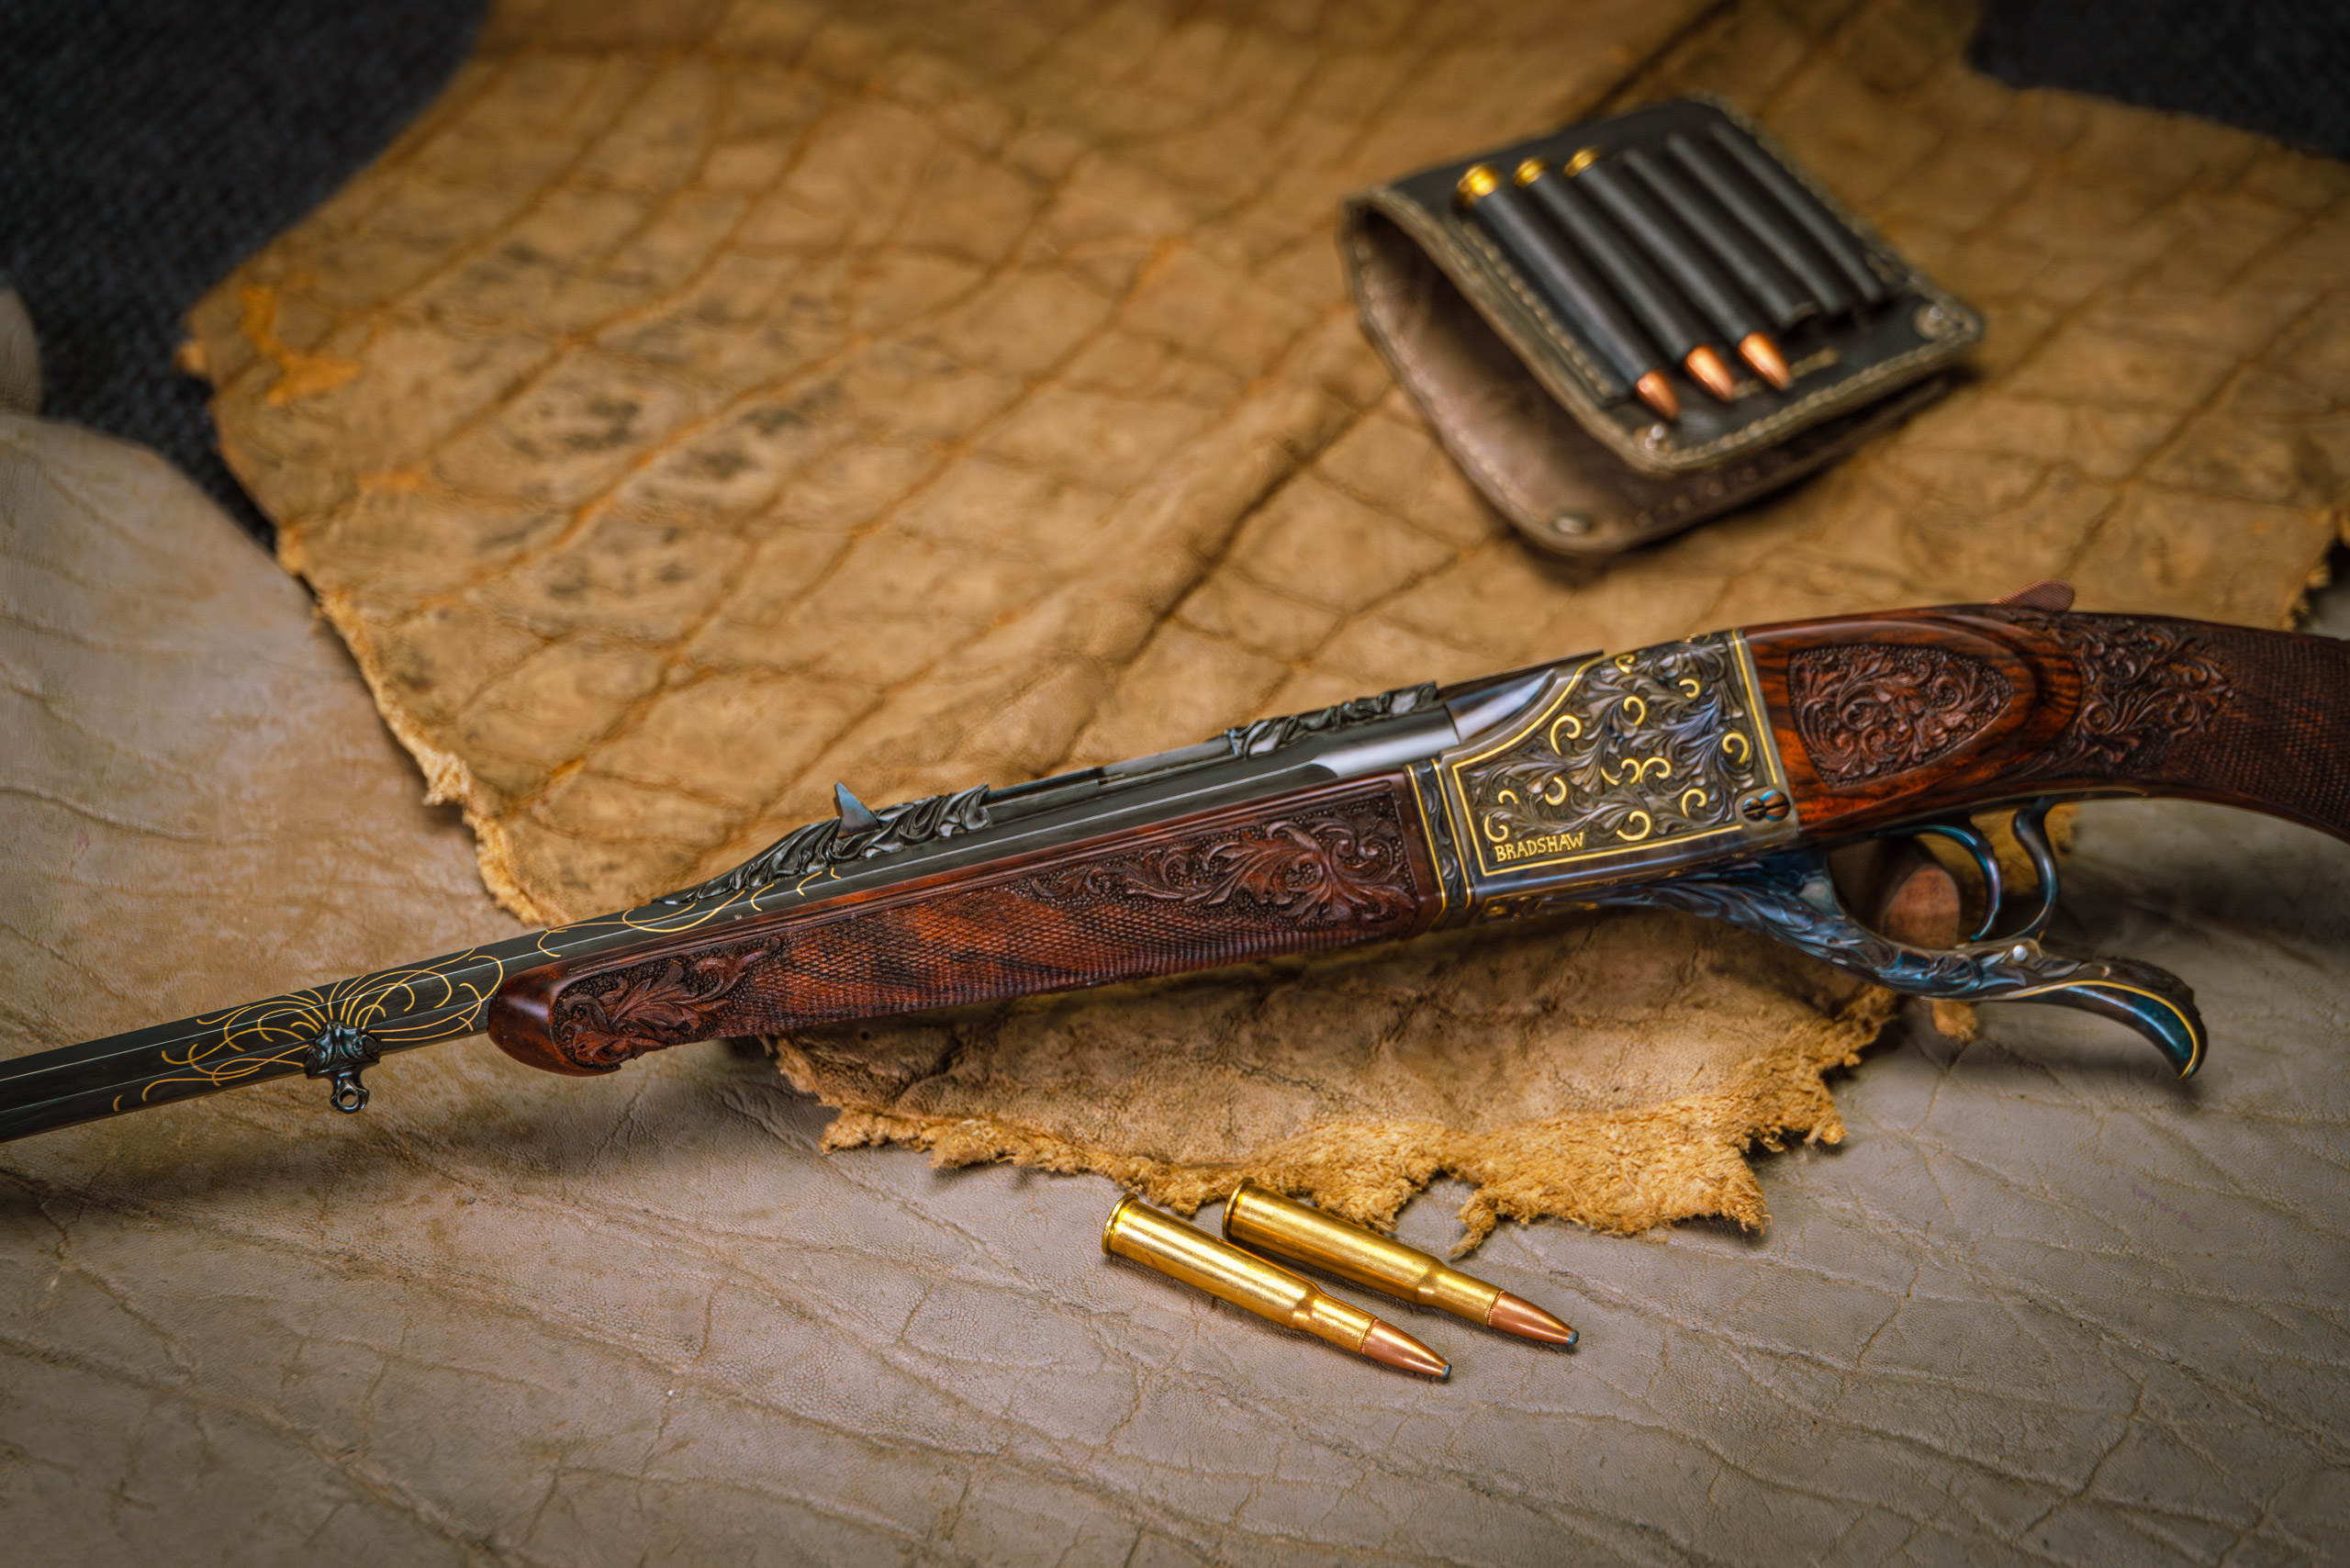 Bradshaw Rifle with Gold Inlays and Blued Action with Detailed Engraving